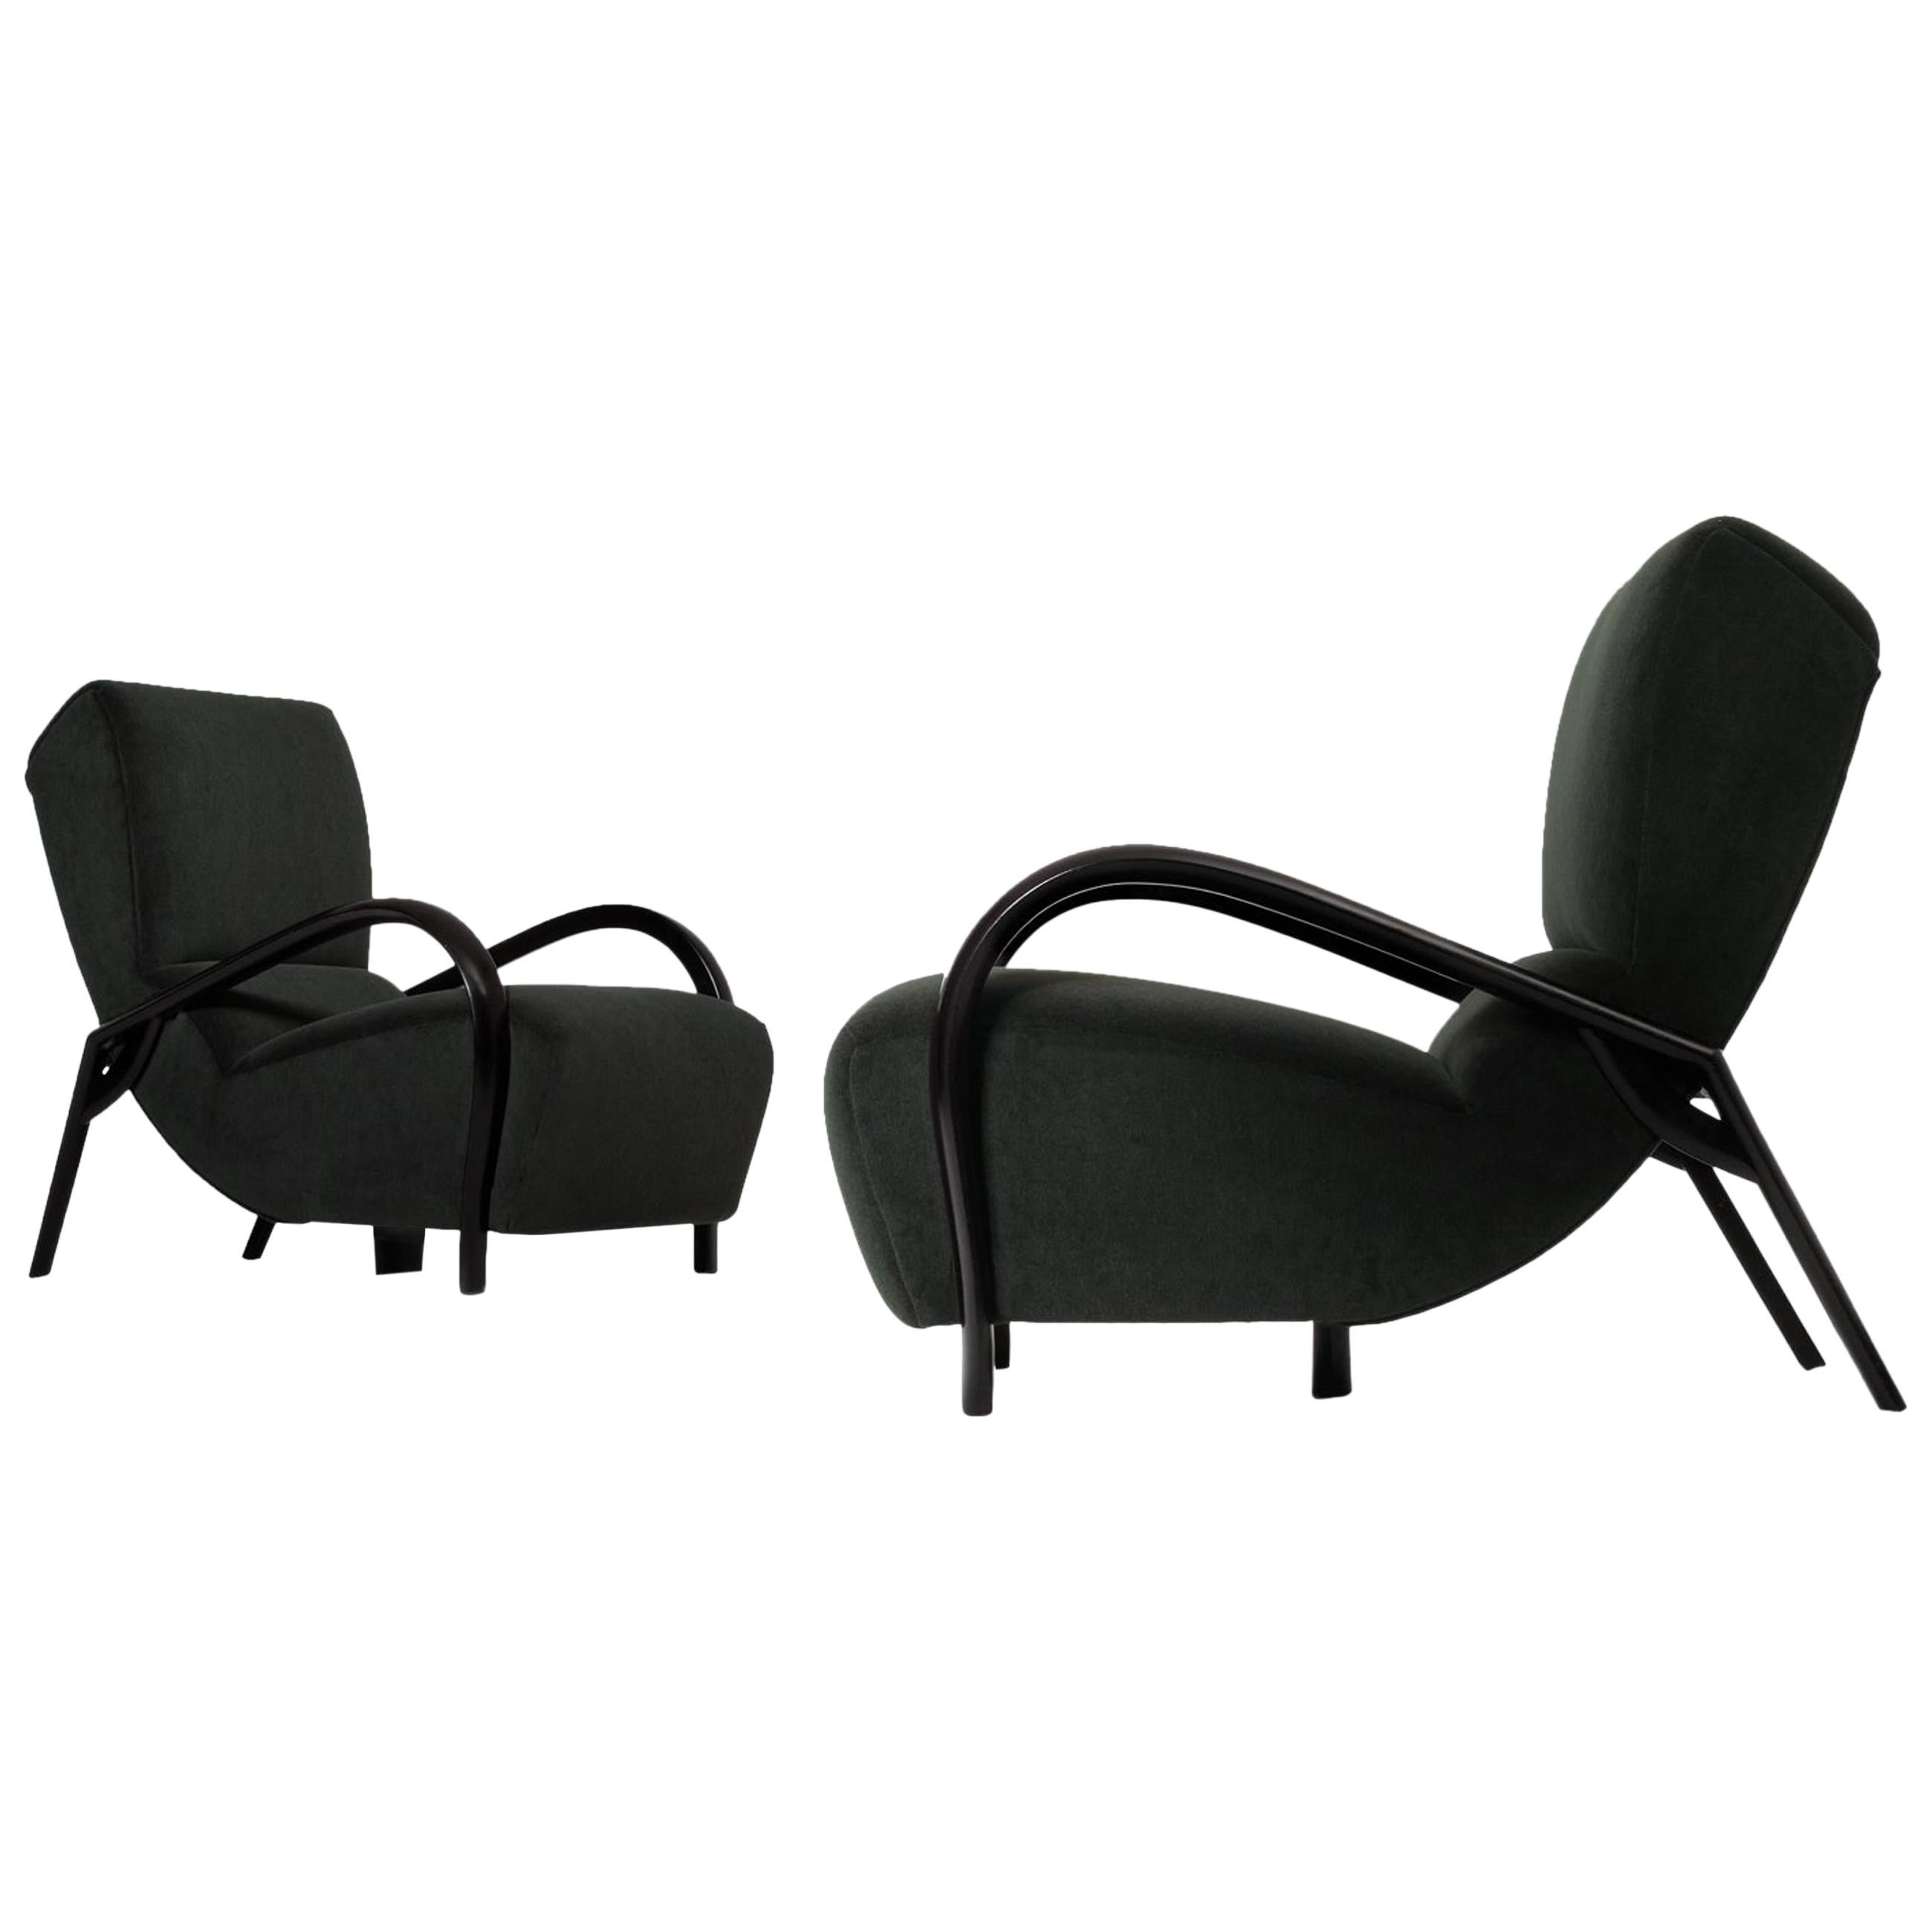 Pair of Curved Italian Lounge Chairs